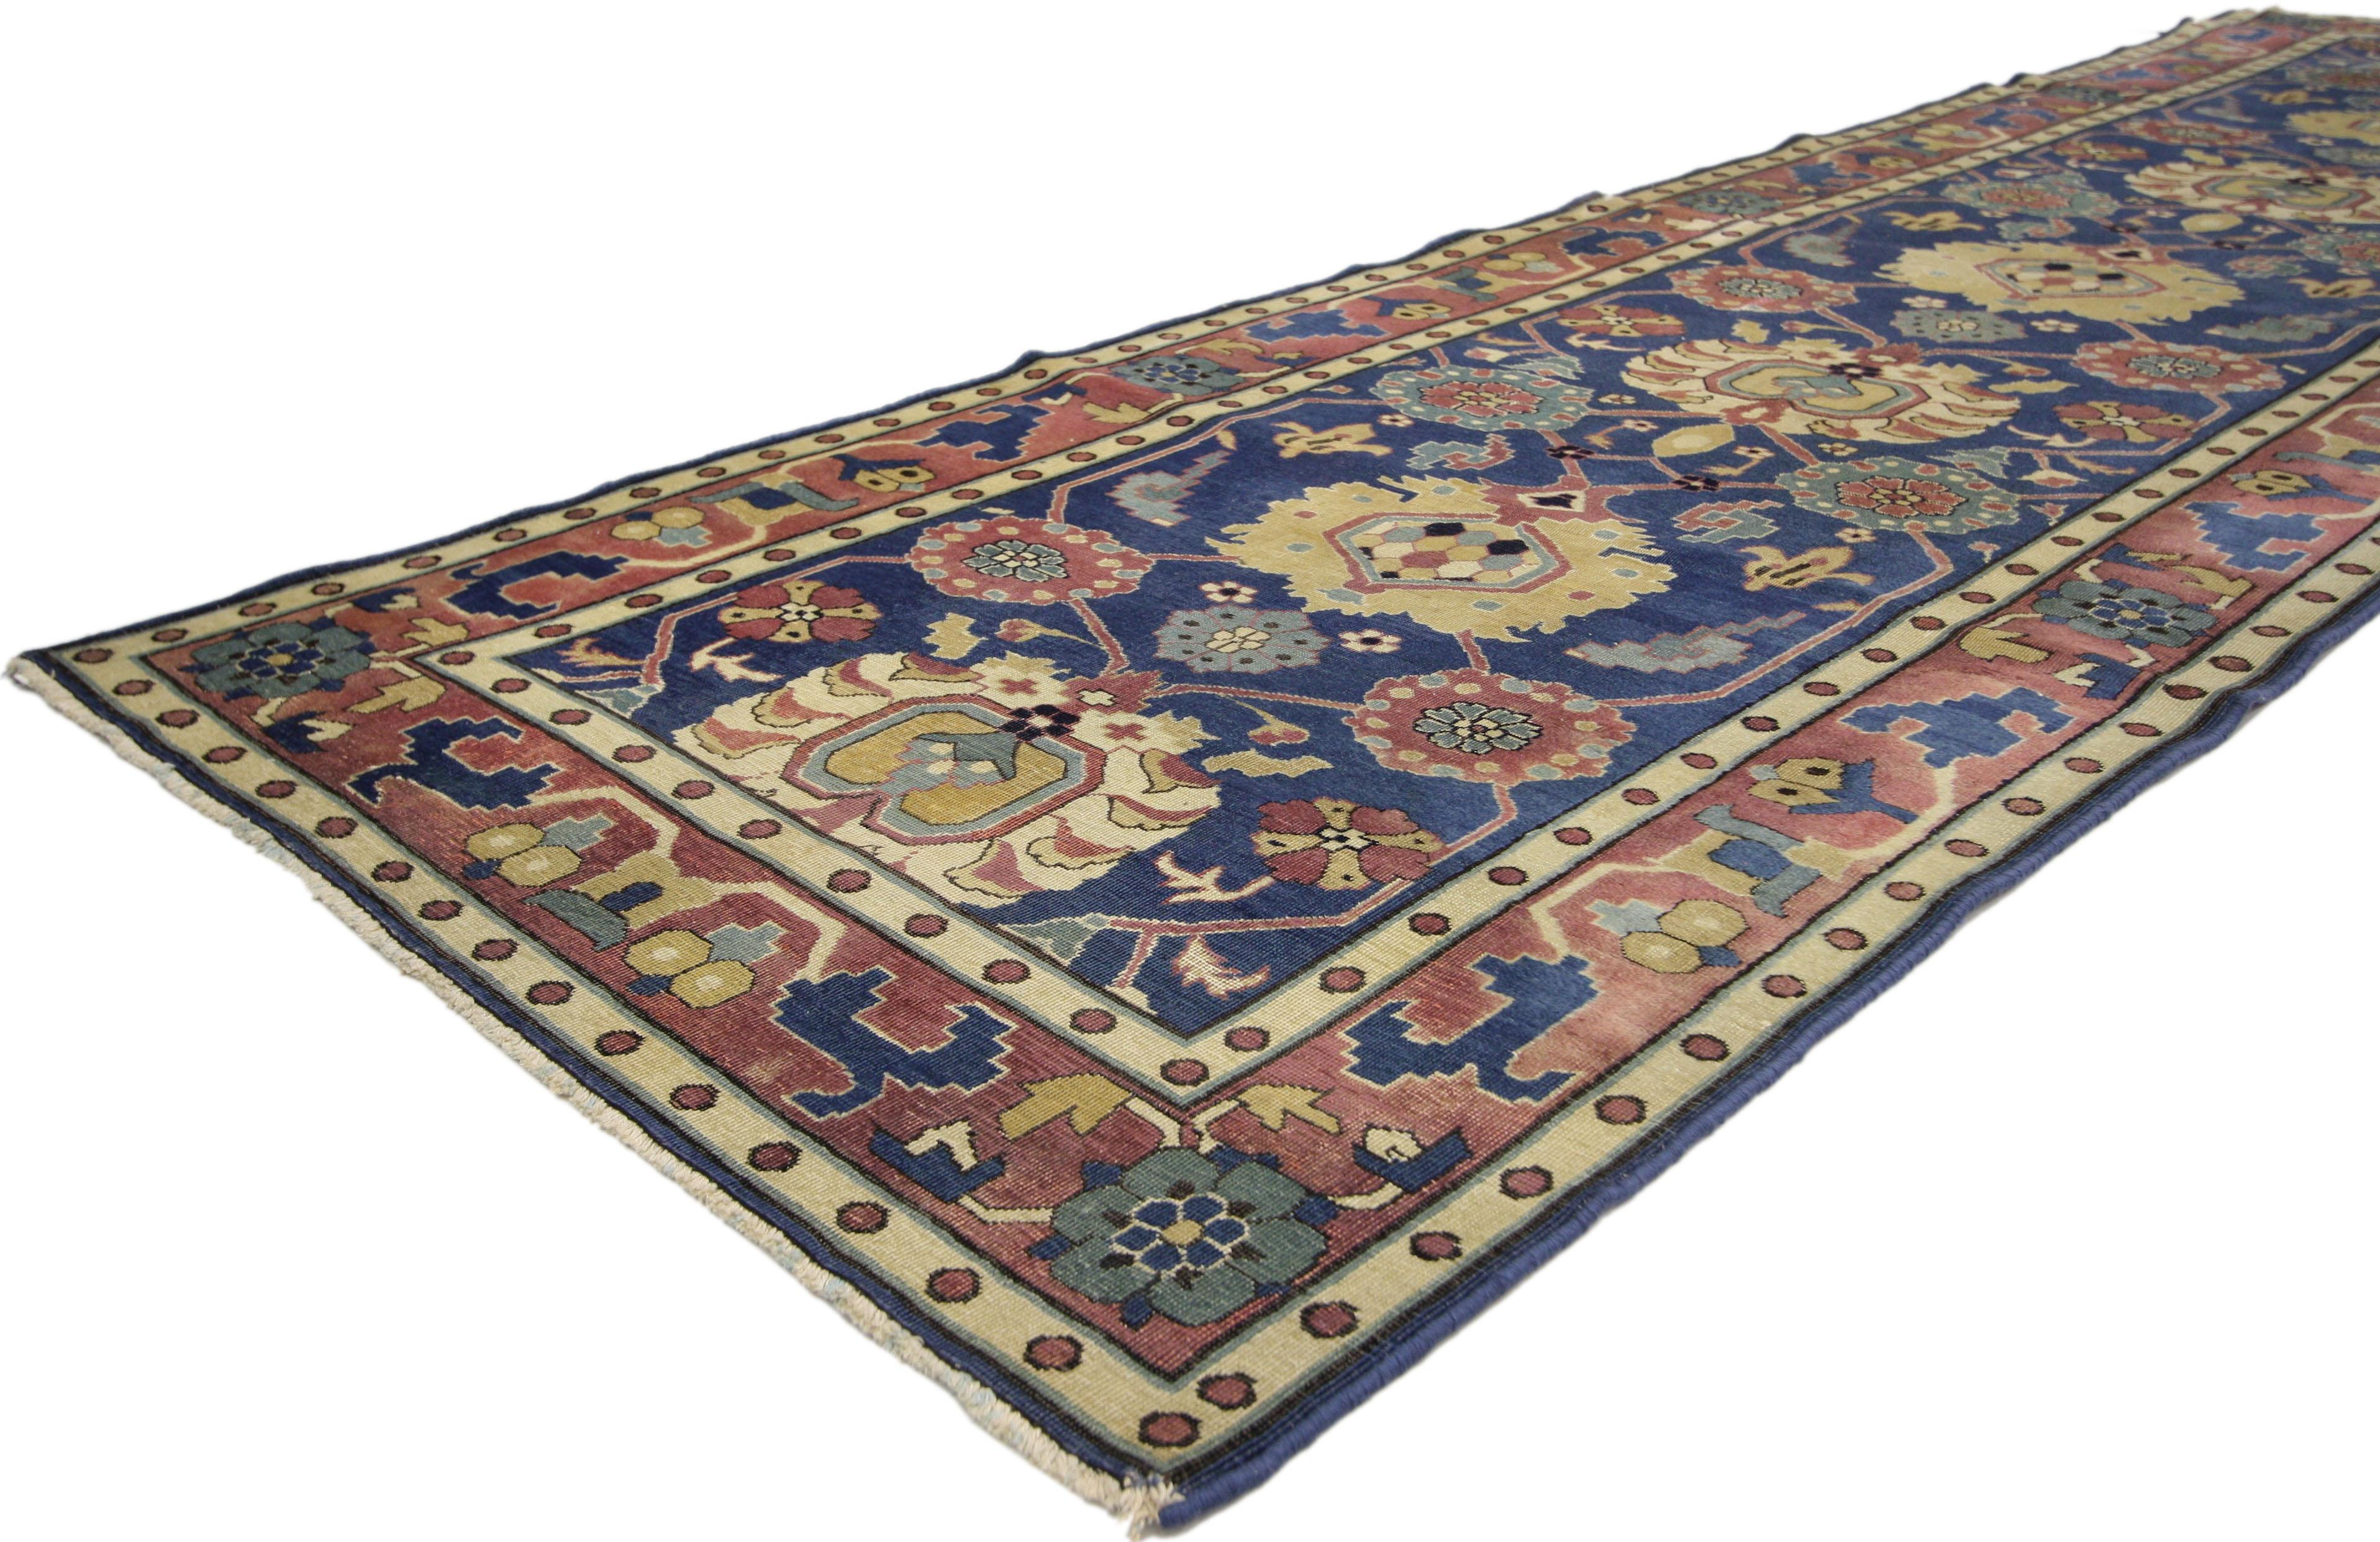 British Indian Ocean Territory Antique Indian Agra Runner in Blue with Modern Design